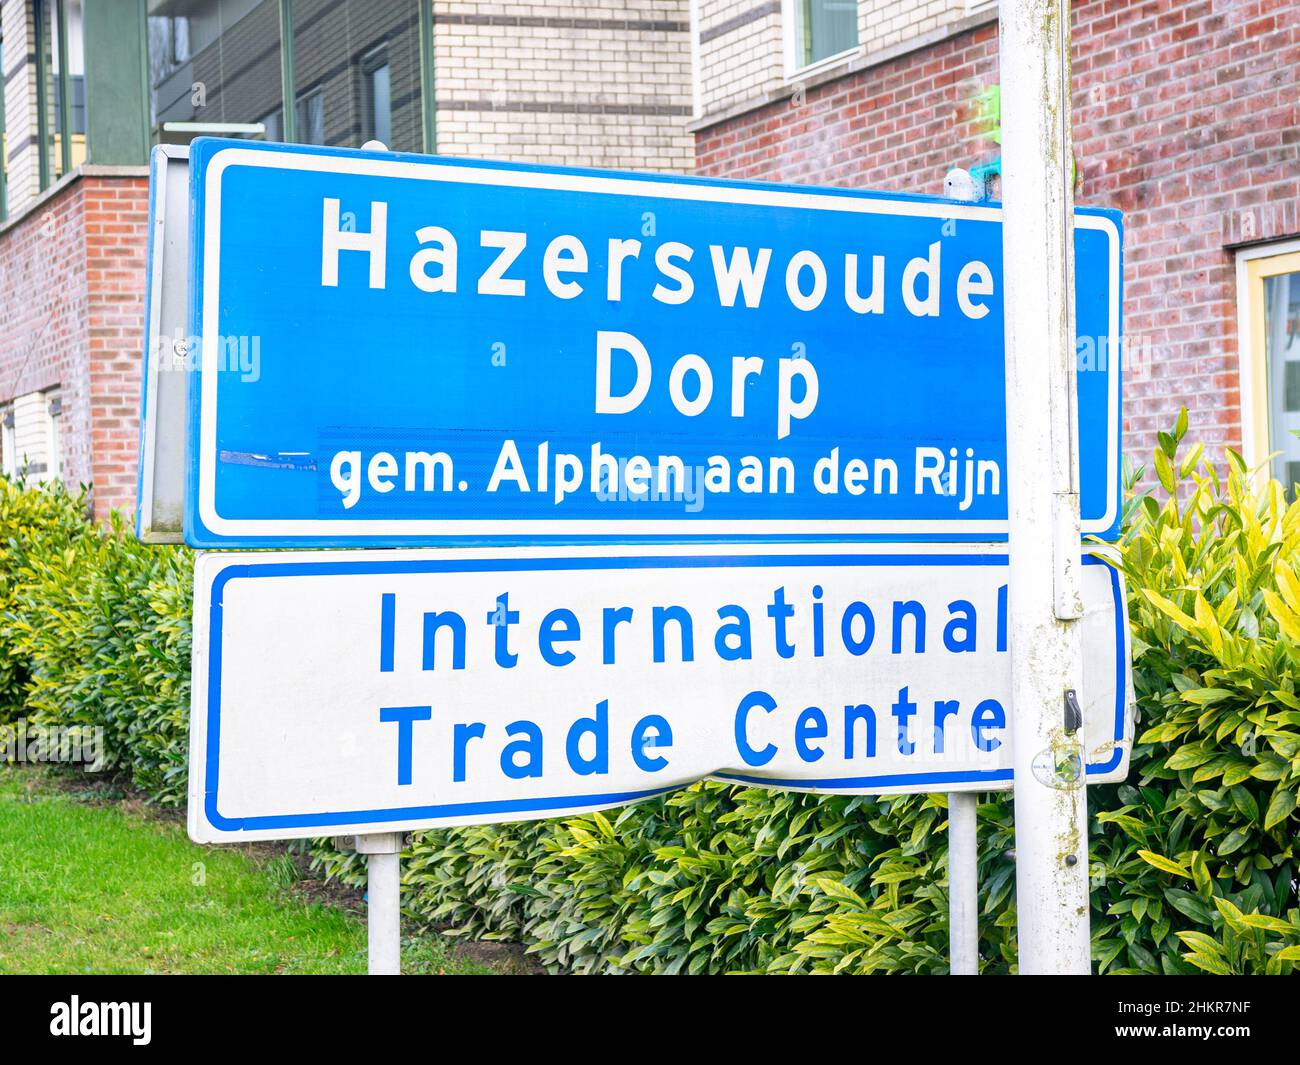 Place name sign of Hazerswoude-dorp, municipality of Alphen aan den Rijn in The Netherlands. Stock Photo